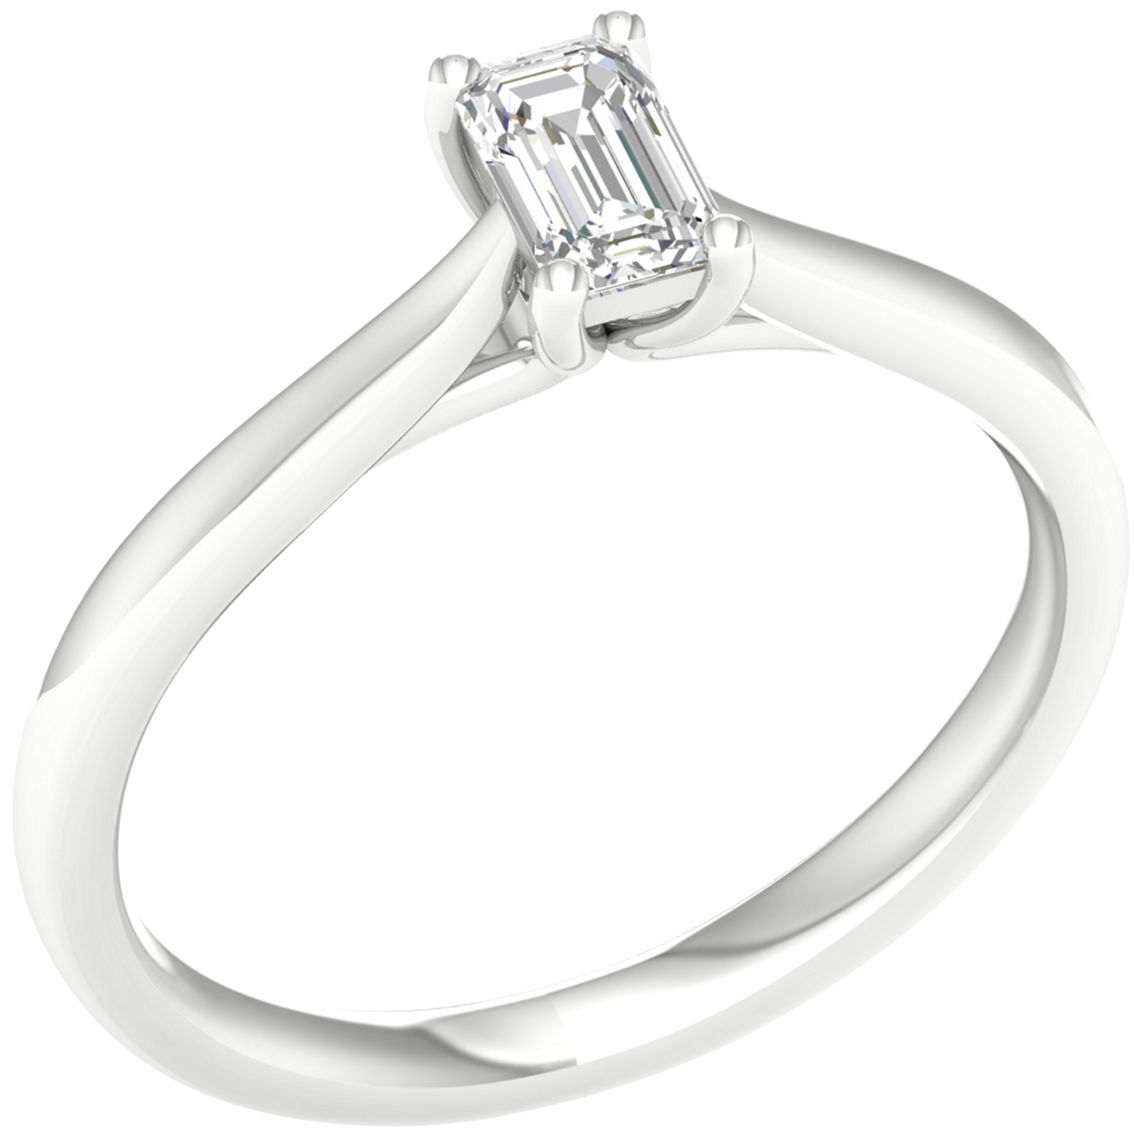 Pure Brilliance 14K White Gold 1/3 CTW Oval Solitaire Ring with IGI Certification - Image 2 of 2